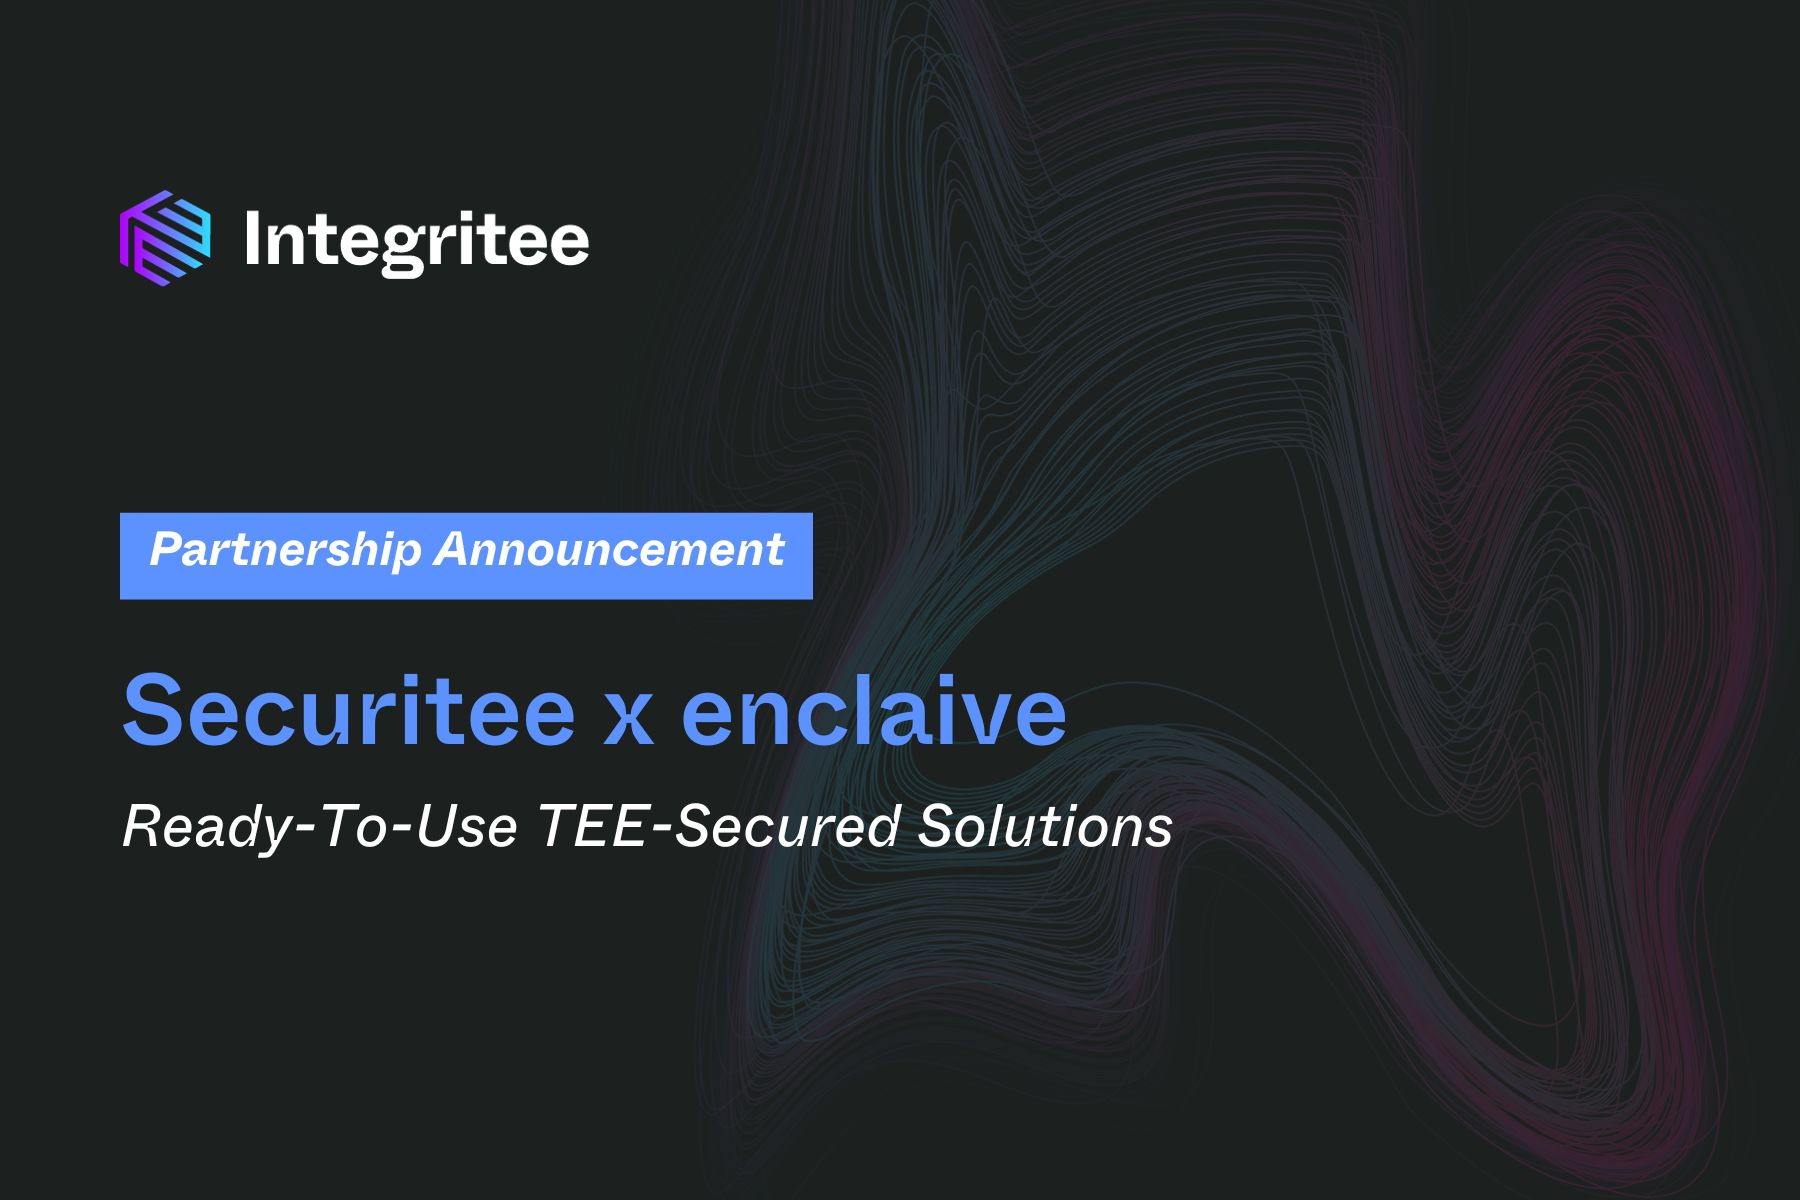 Securitee & enclaive Team Up to Offer Ready-To-Use TEE-Secured Solutions